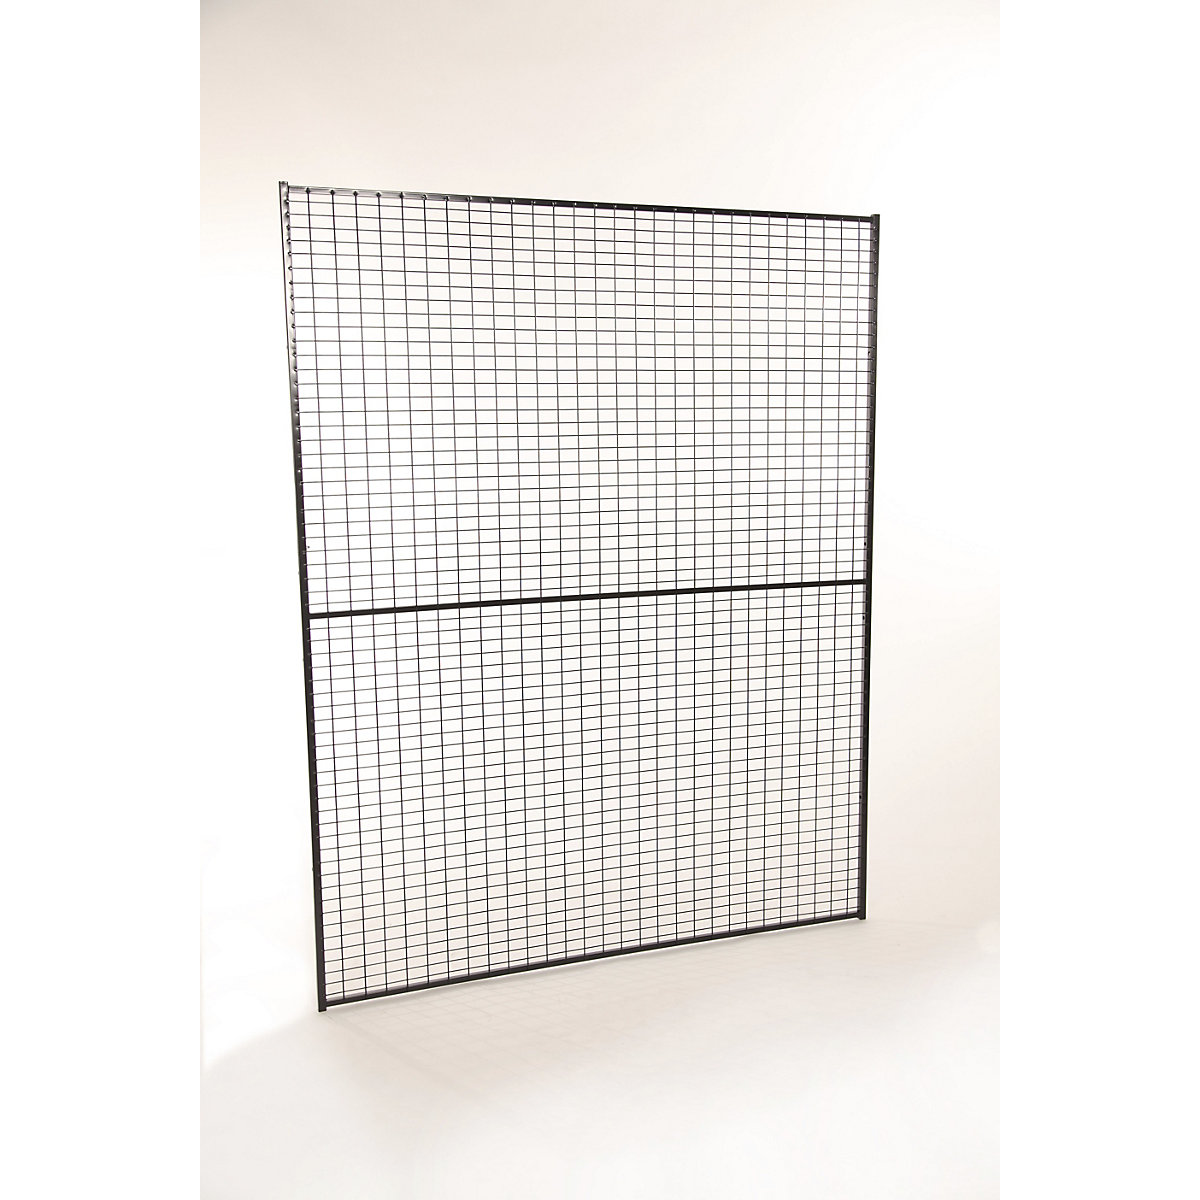 X-GUARD LITE machine protective fencing, wall section – Axelent, height 1900 mm, width 1100 mm-9